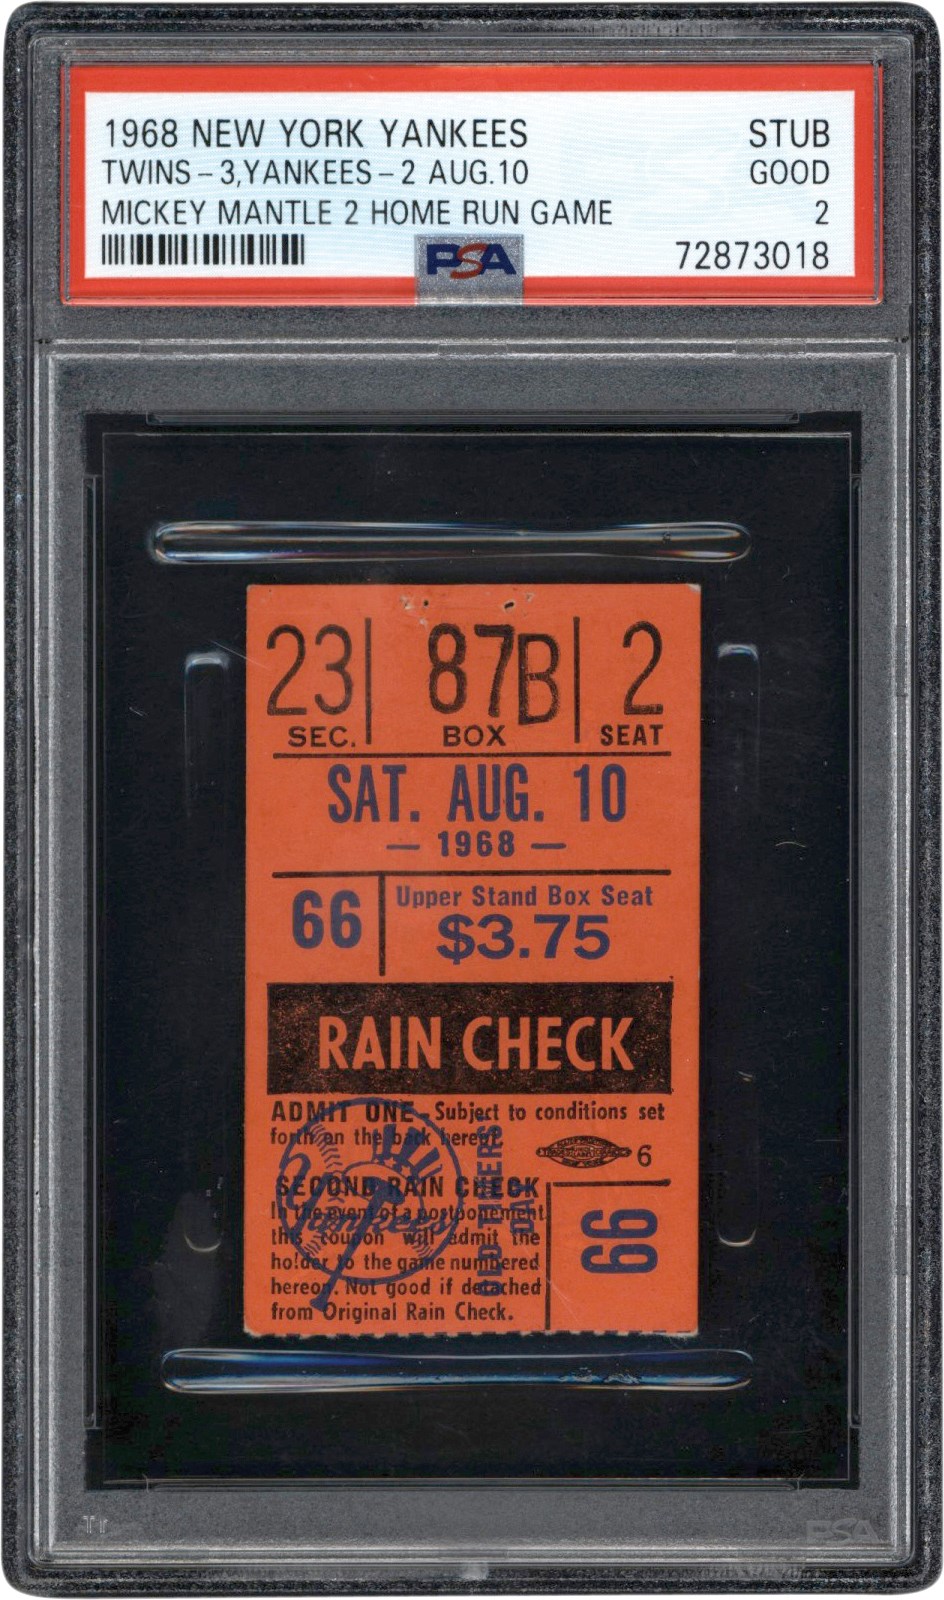 1968 Mickey Mantle Last Two Home Run Game Ticket Stub and Program (PSA)